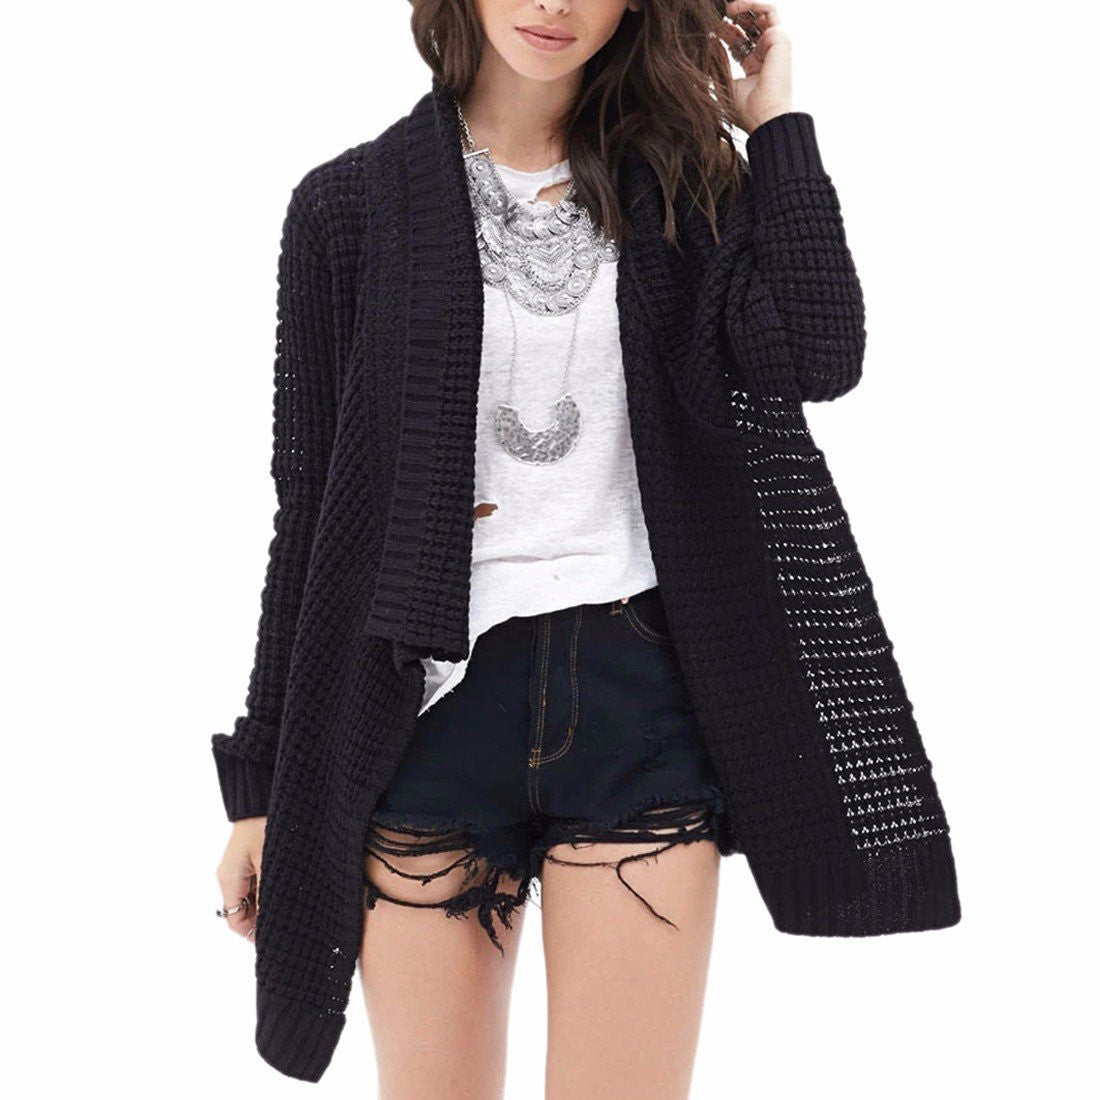 Leisure Hollow-Out Irregular Ladies Knitted Cardigan - Oh Yours Fashion - 2